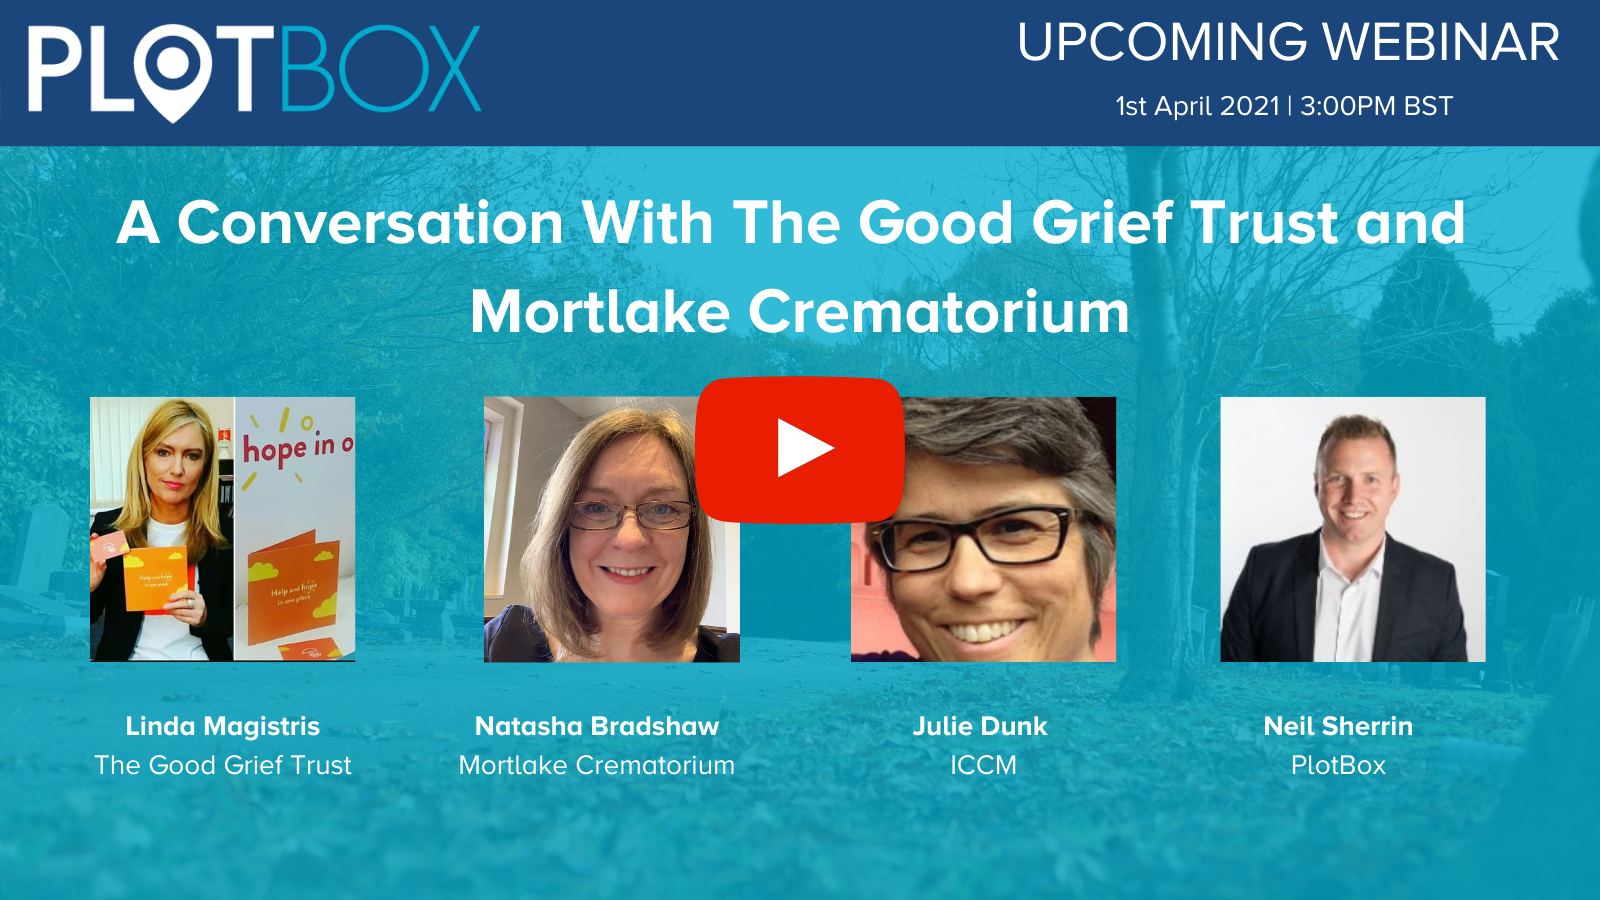 1st April 2021: A Conversation With The Good Grief Trust and Mortlake Crematorium